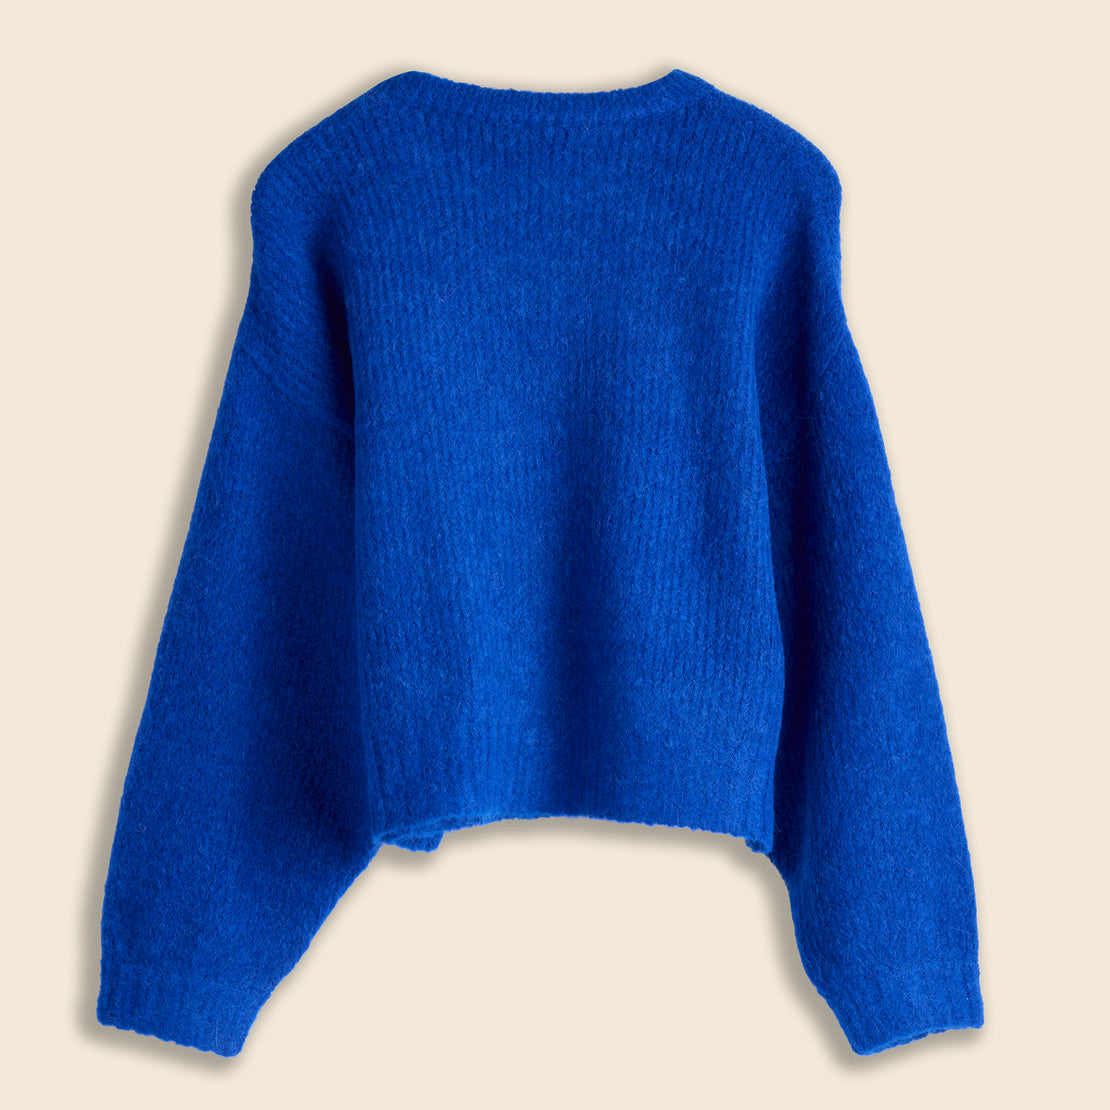 Balloon Sleeve Sweater - Blue - Atelier Delphine - STAG Provisions - W - Tops - Sweater